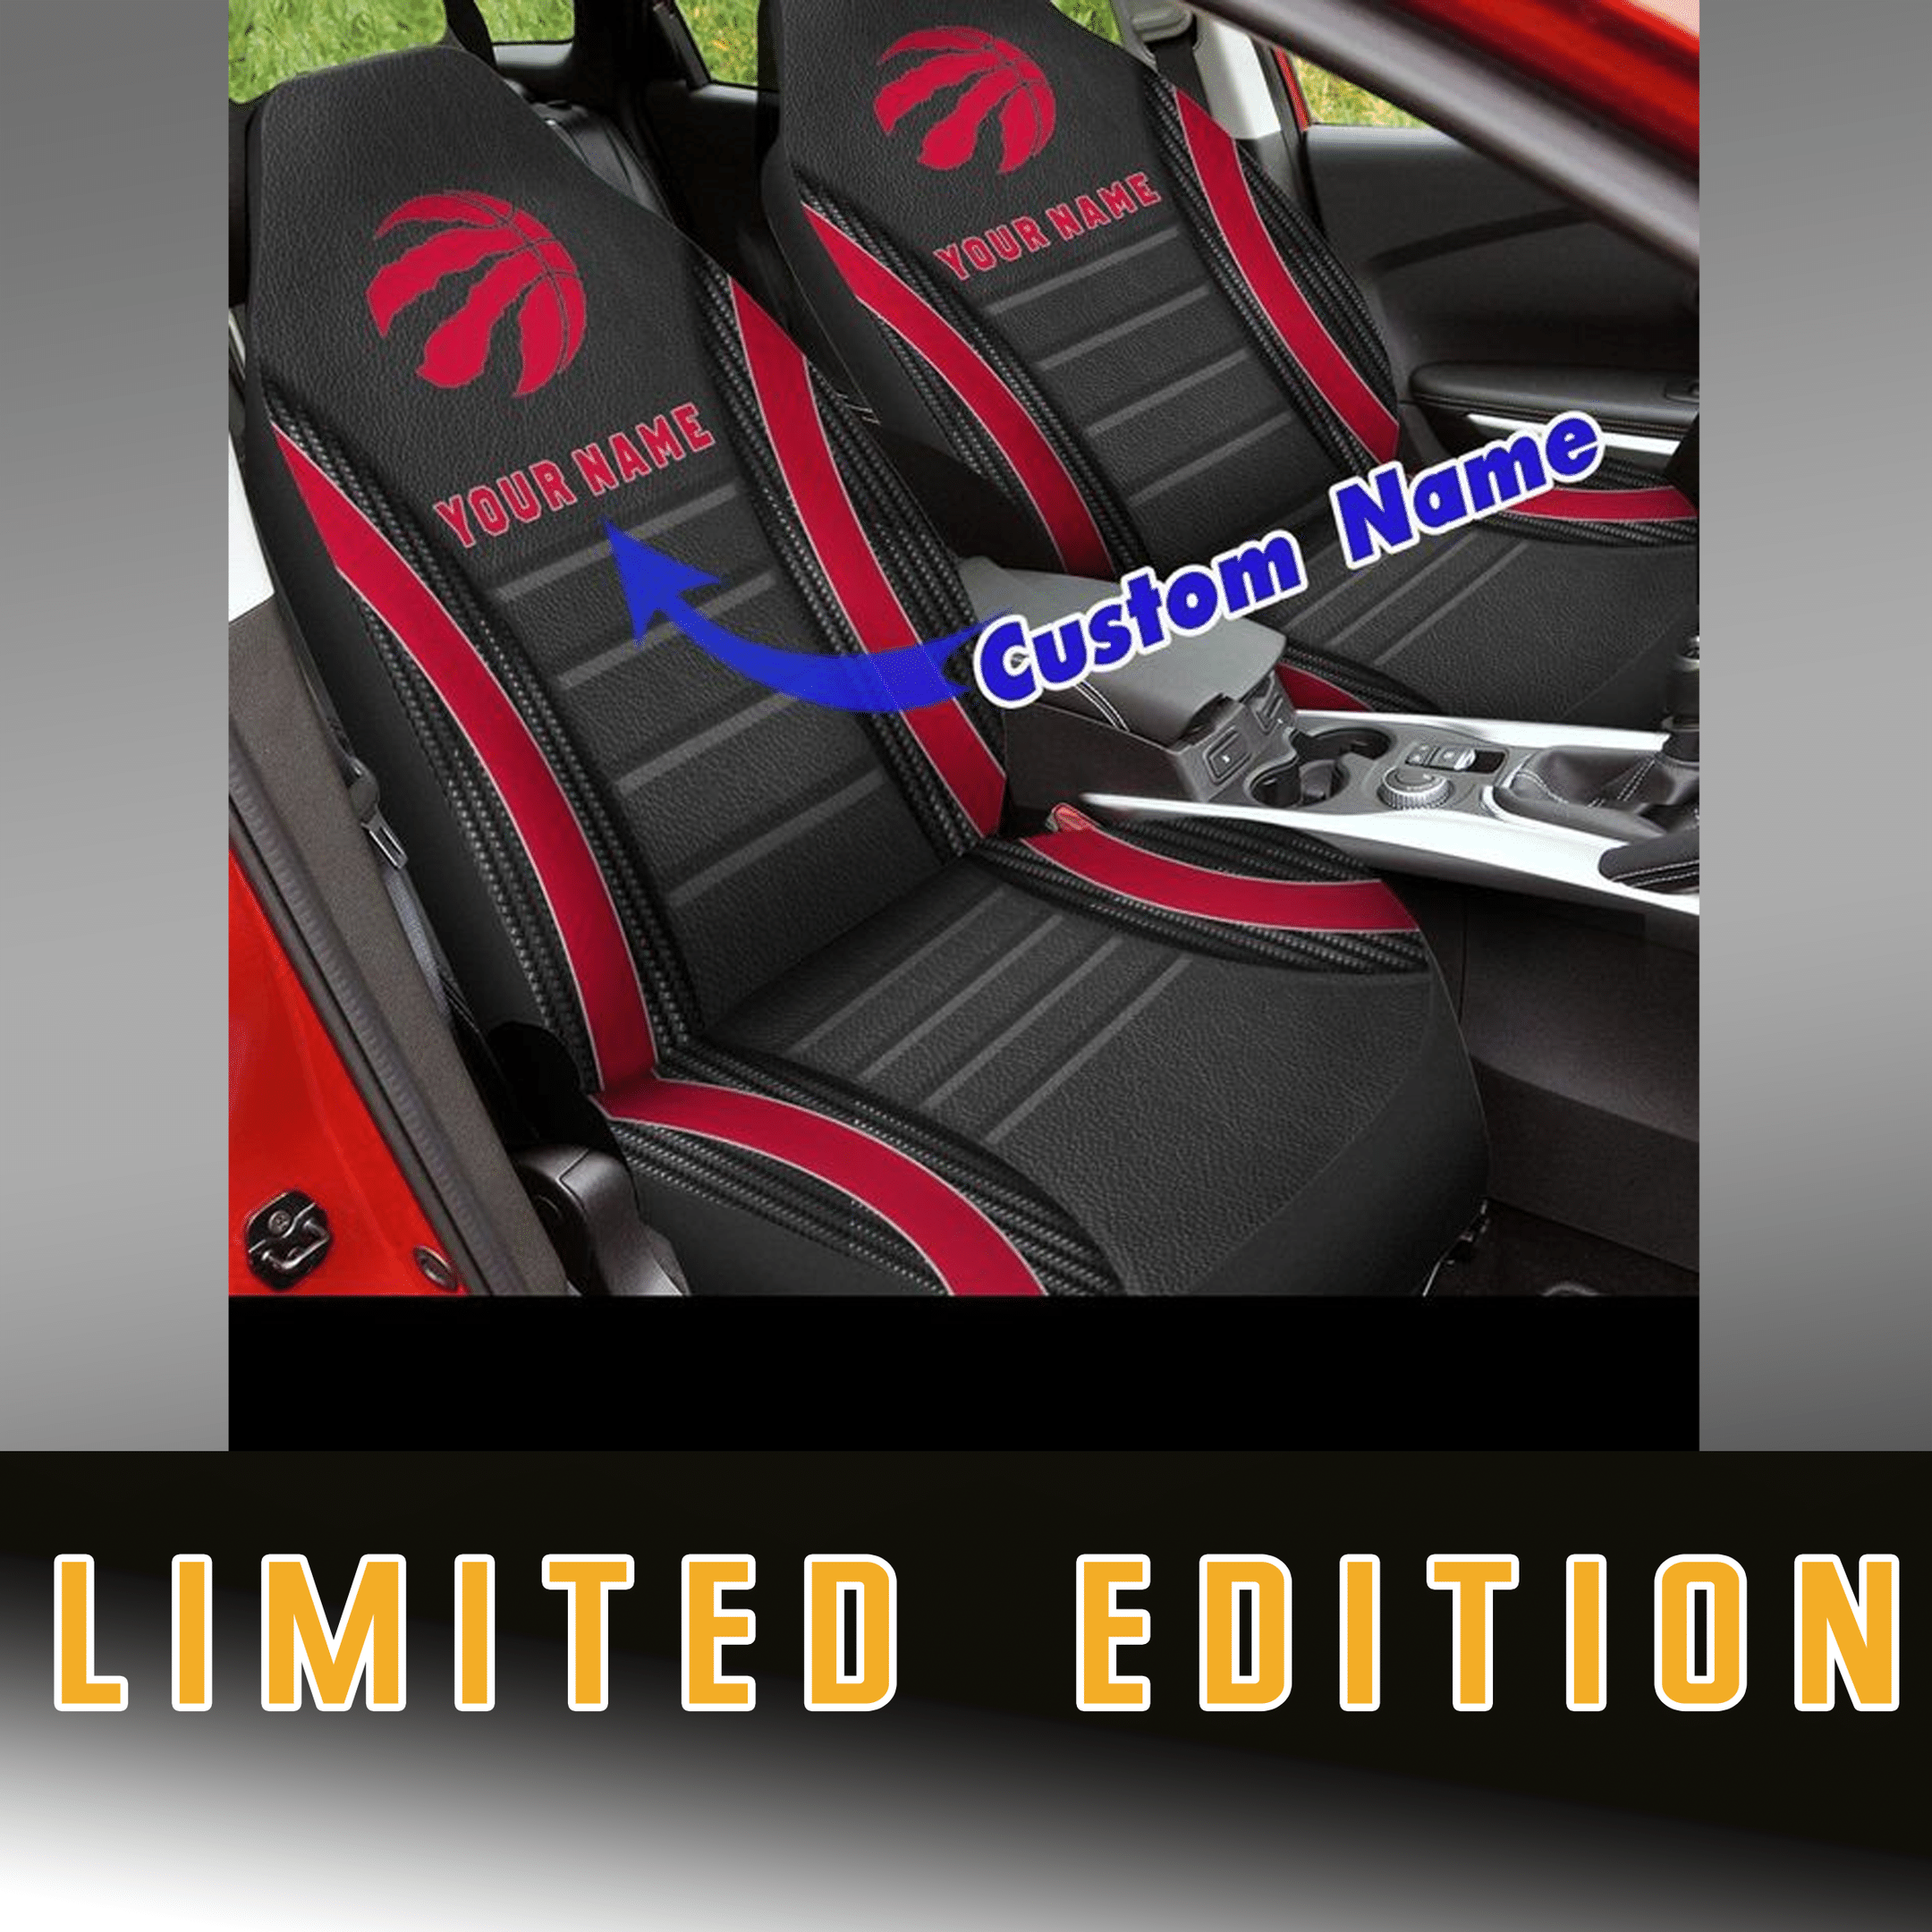 Click now to buy top cool seat cover to protect your car 294